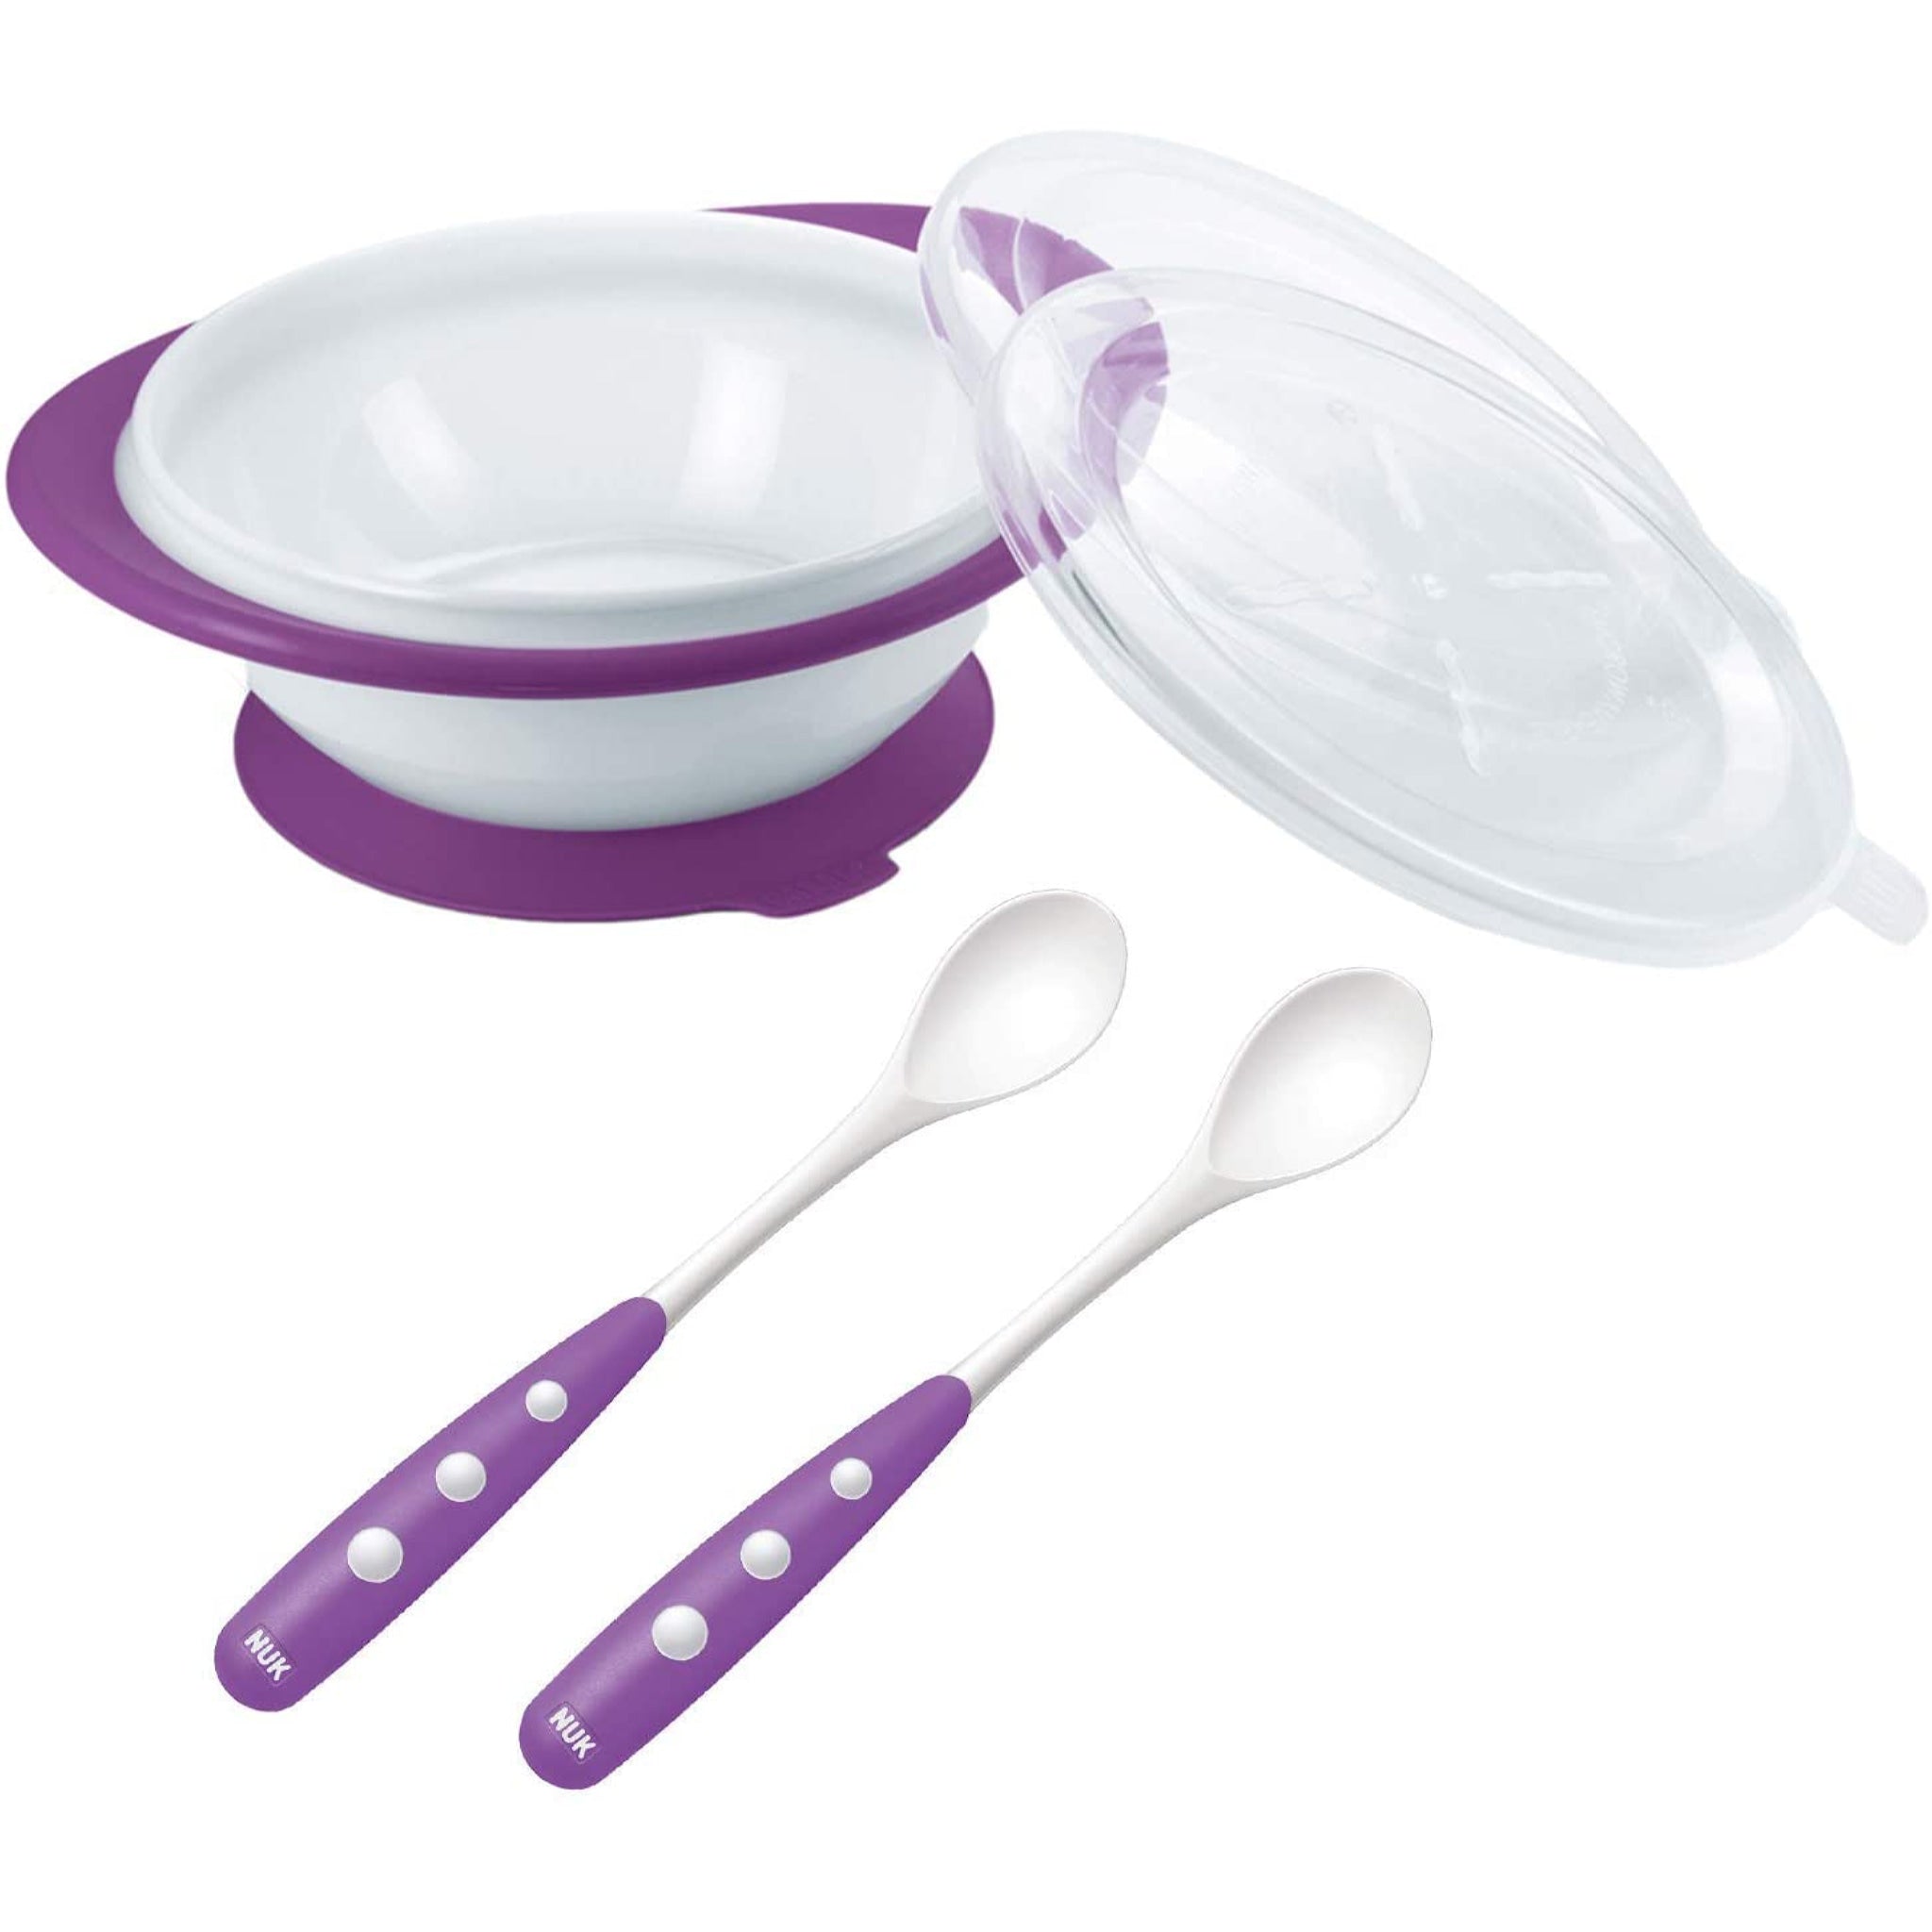 NUK Learn to Eat Training Set Sippy Cup with Feeding Bowl and Spoons Purple